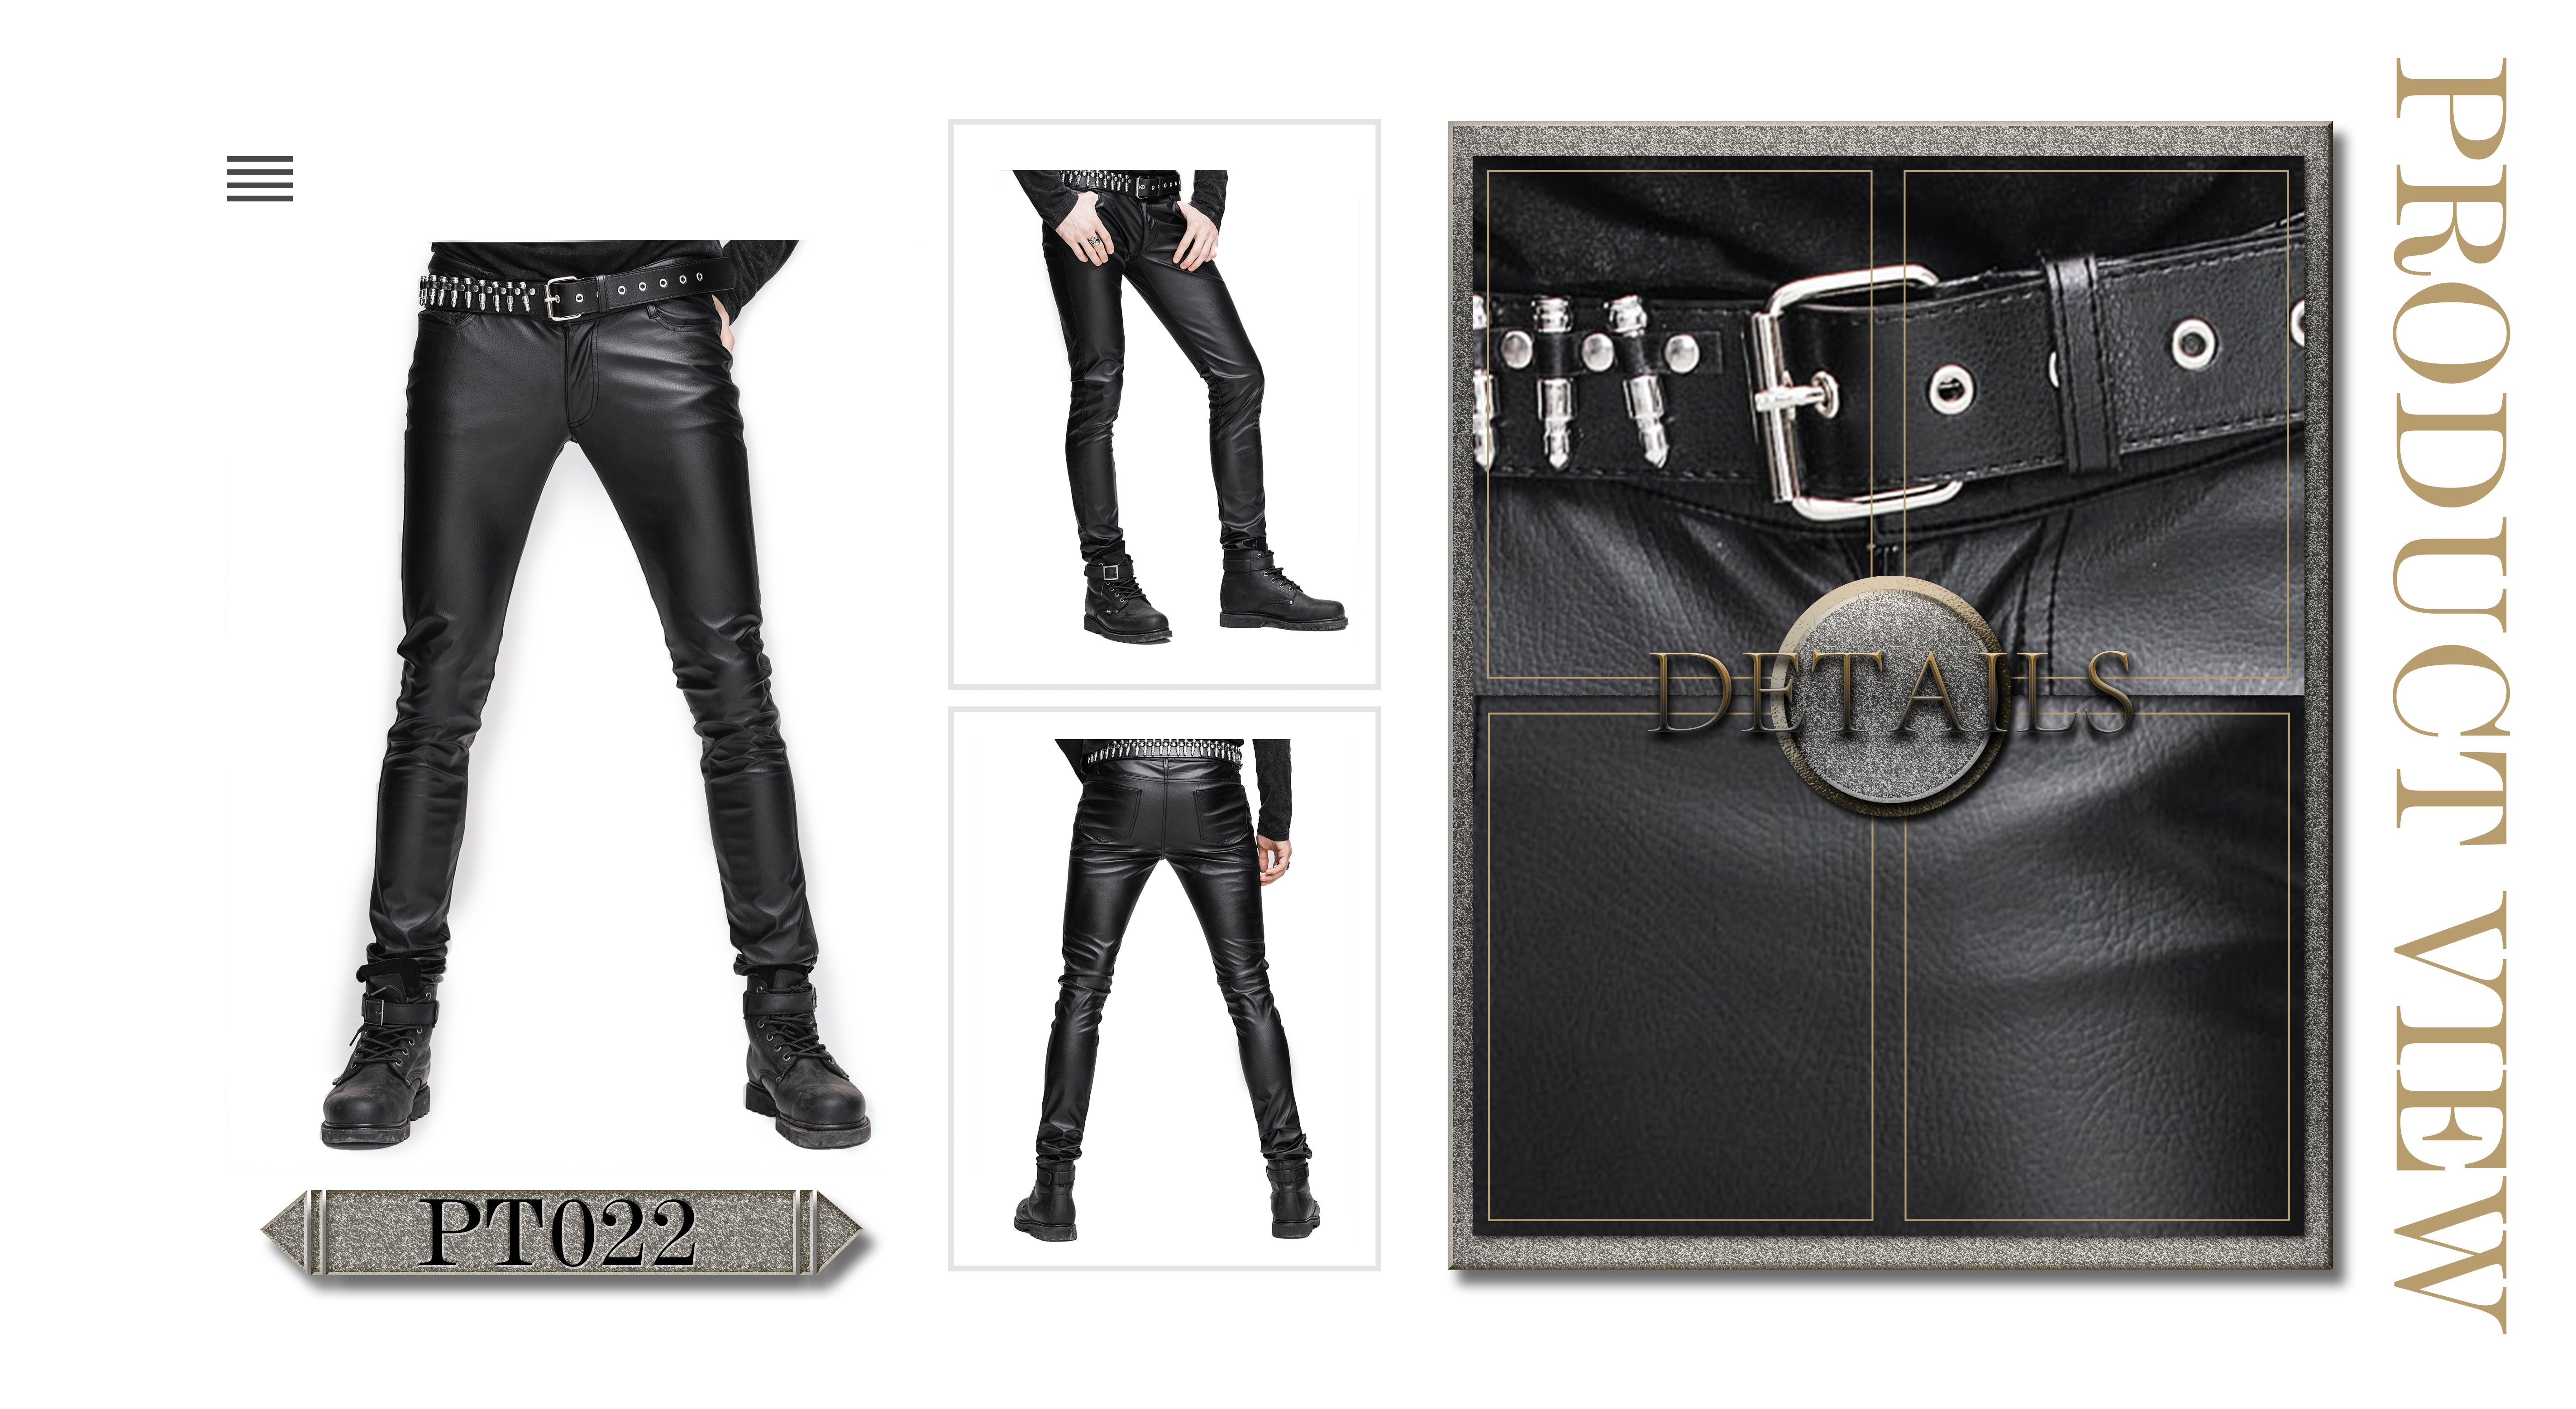 Best Seller Daily Wear Men Synthetic Leather Basic Model Punk Tight Trousers